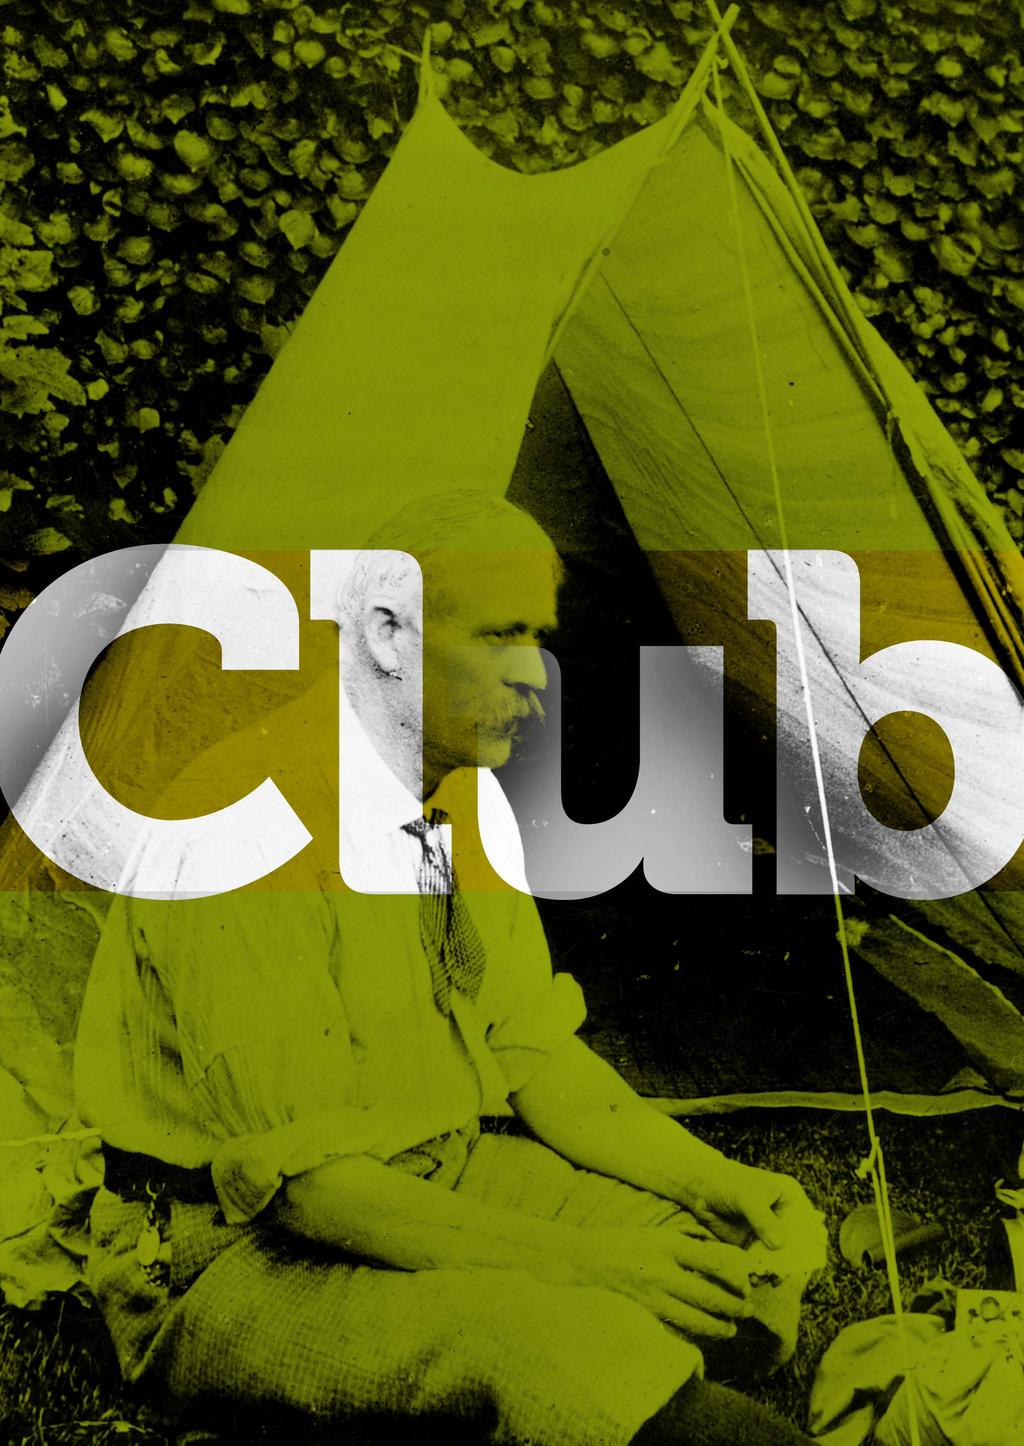 \ Formed in 1901 the Club is the largest and longest established organisation of its kind in the world for all forms of camping.